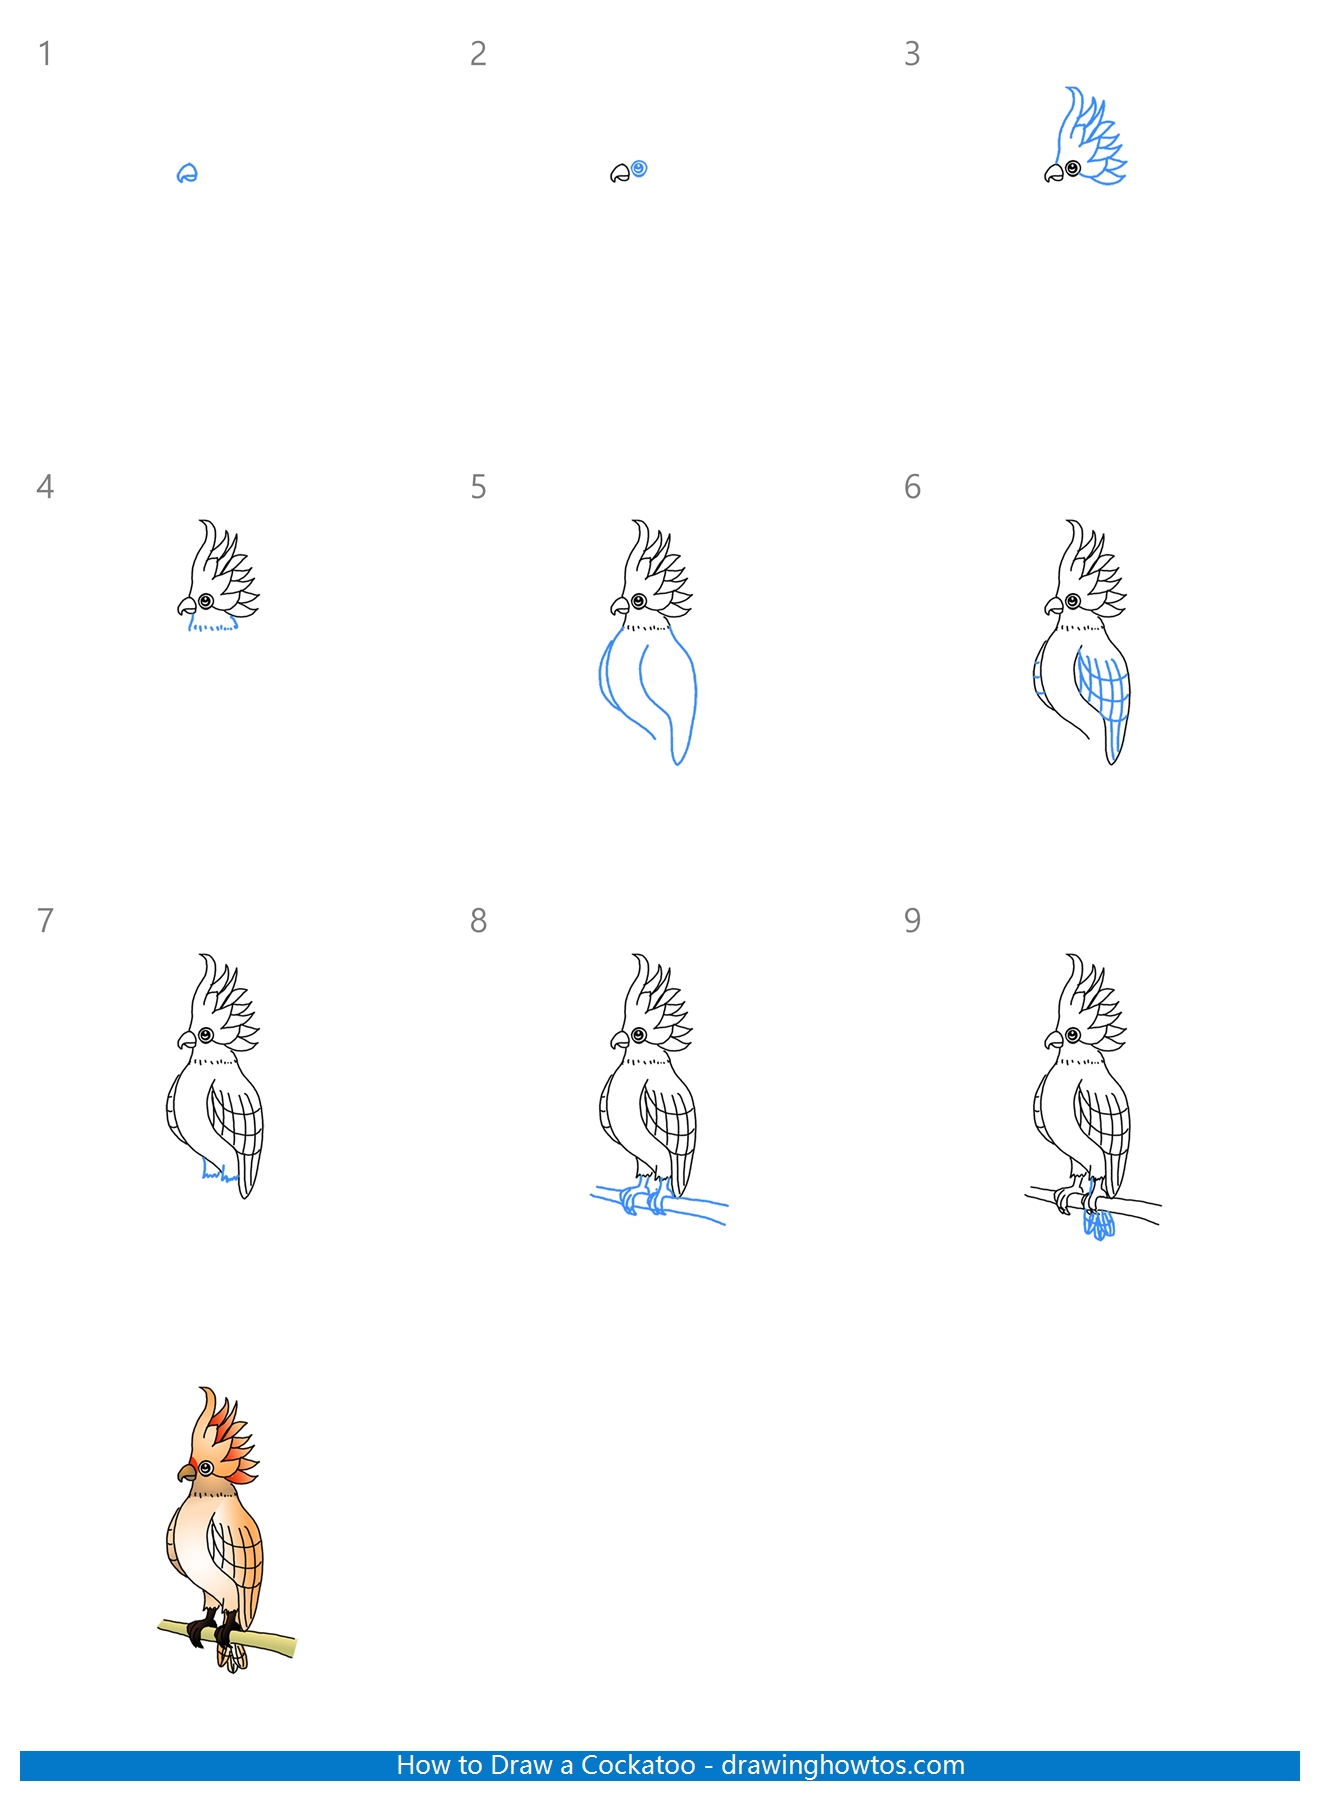 How to Draw a Cockatoo Step by Step